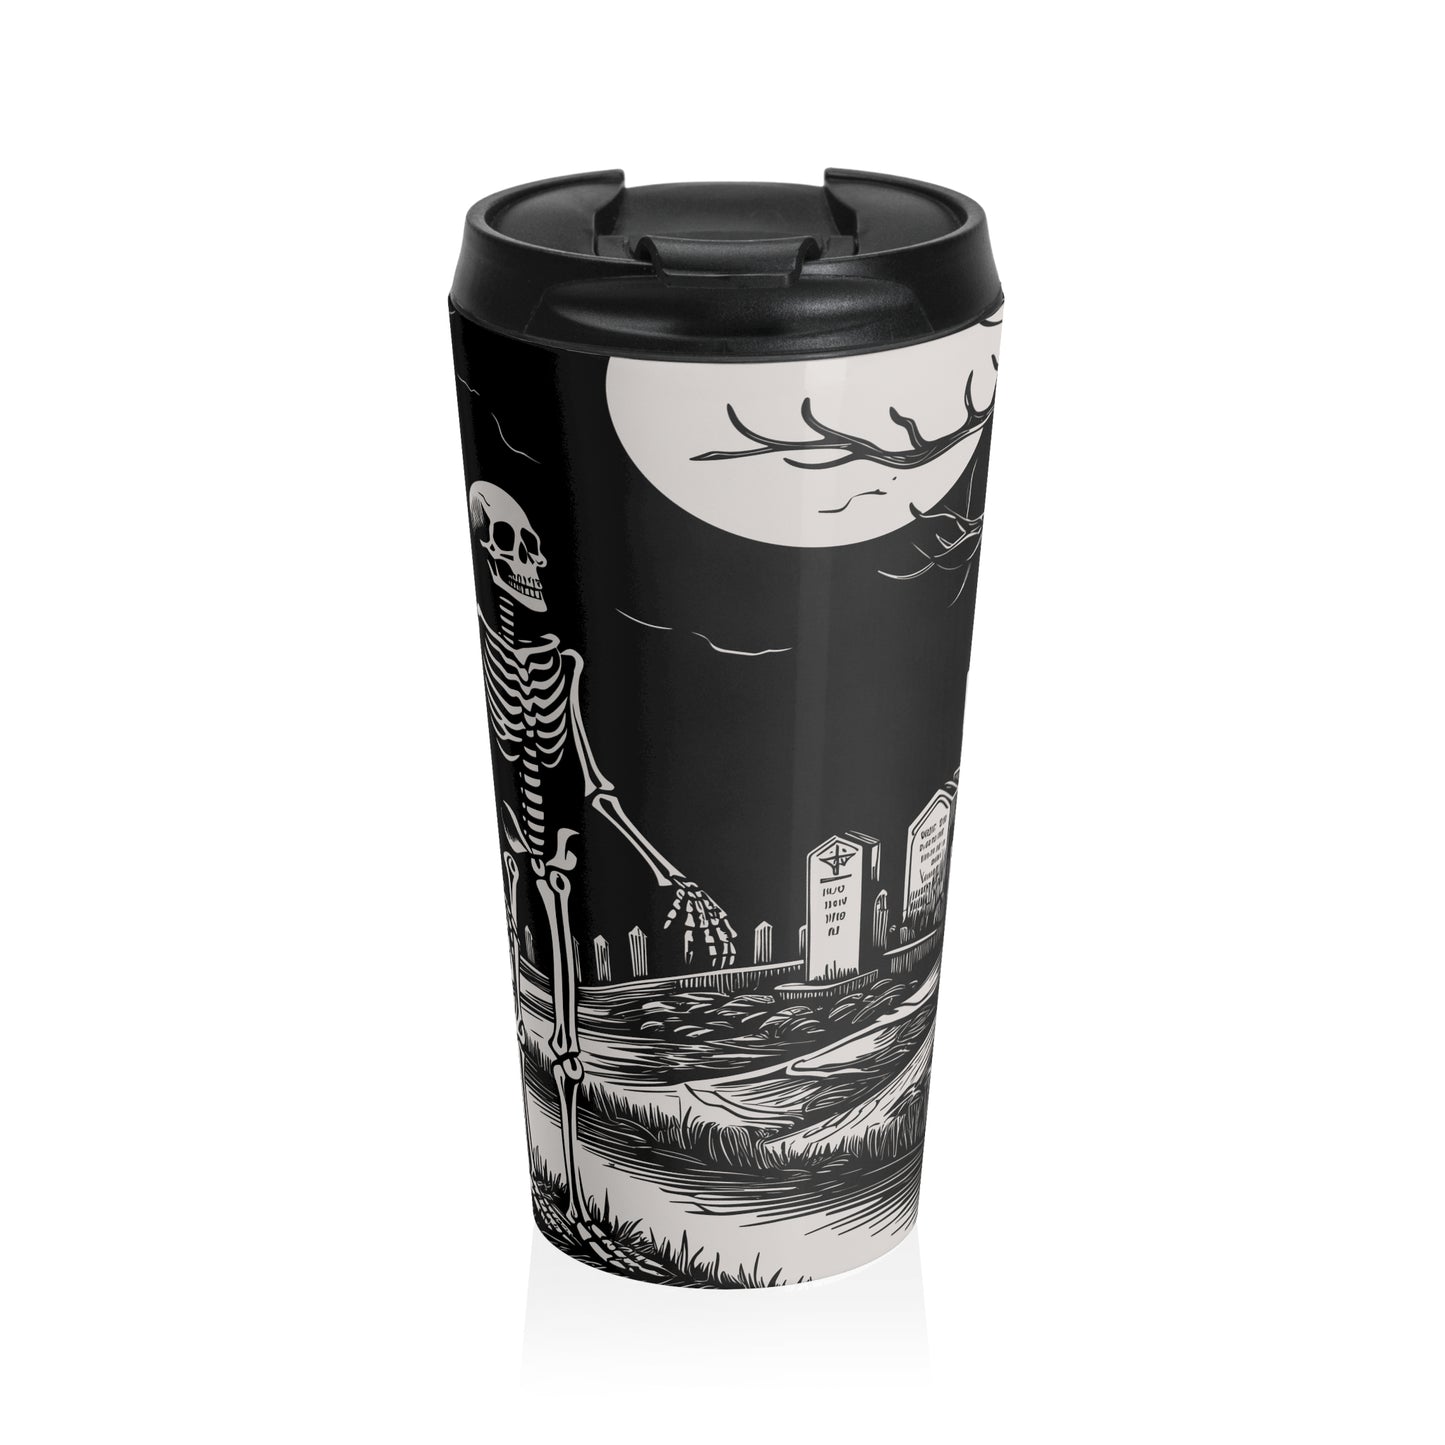 "A Casual Stroll" Stainless Steel Travel Mug